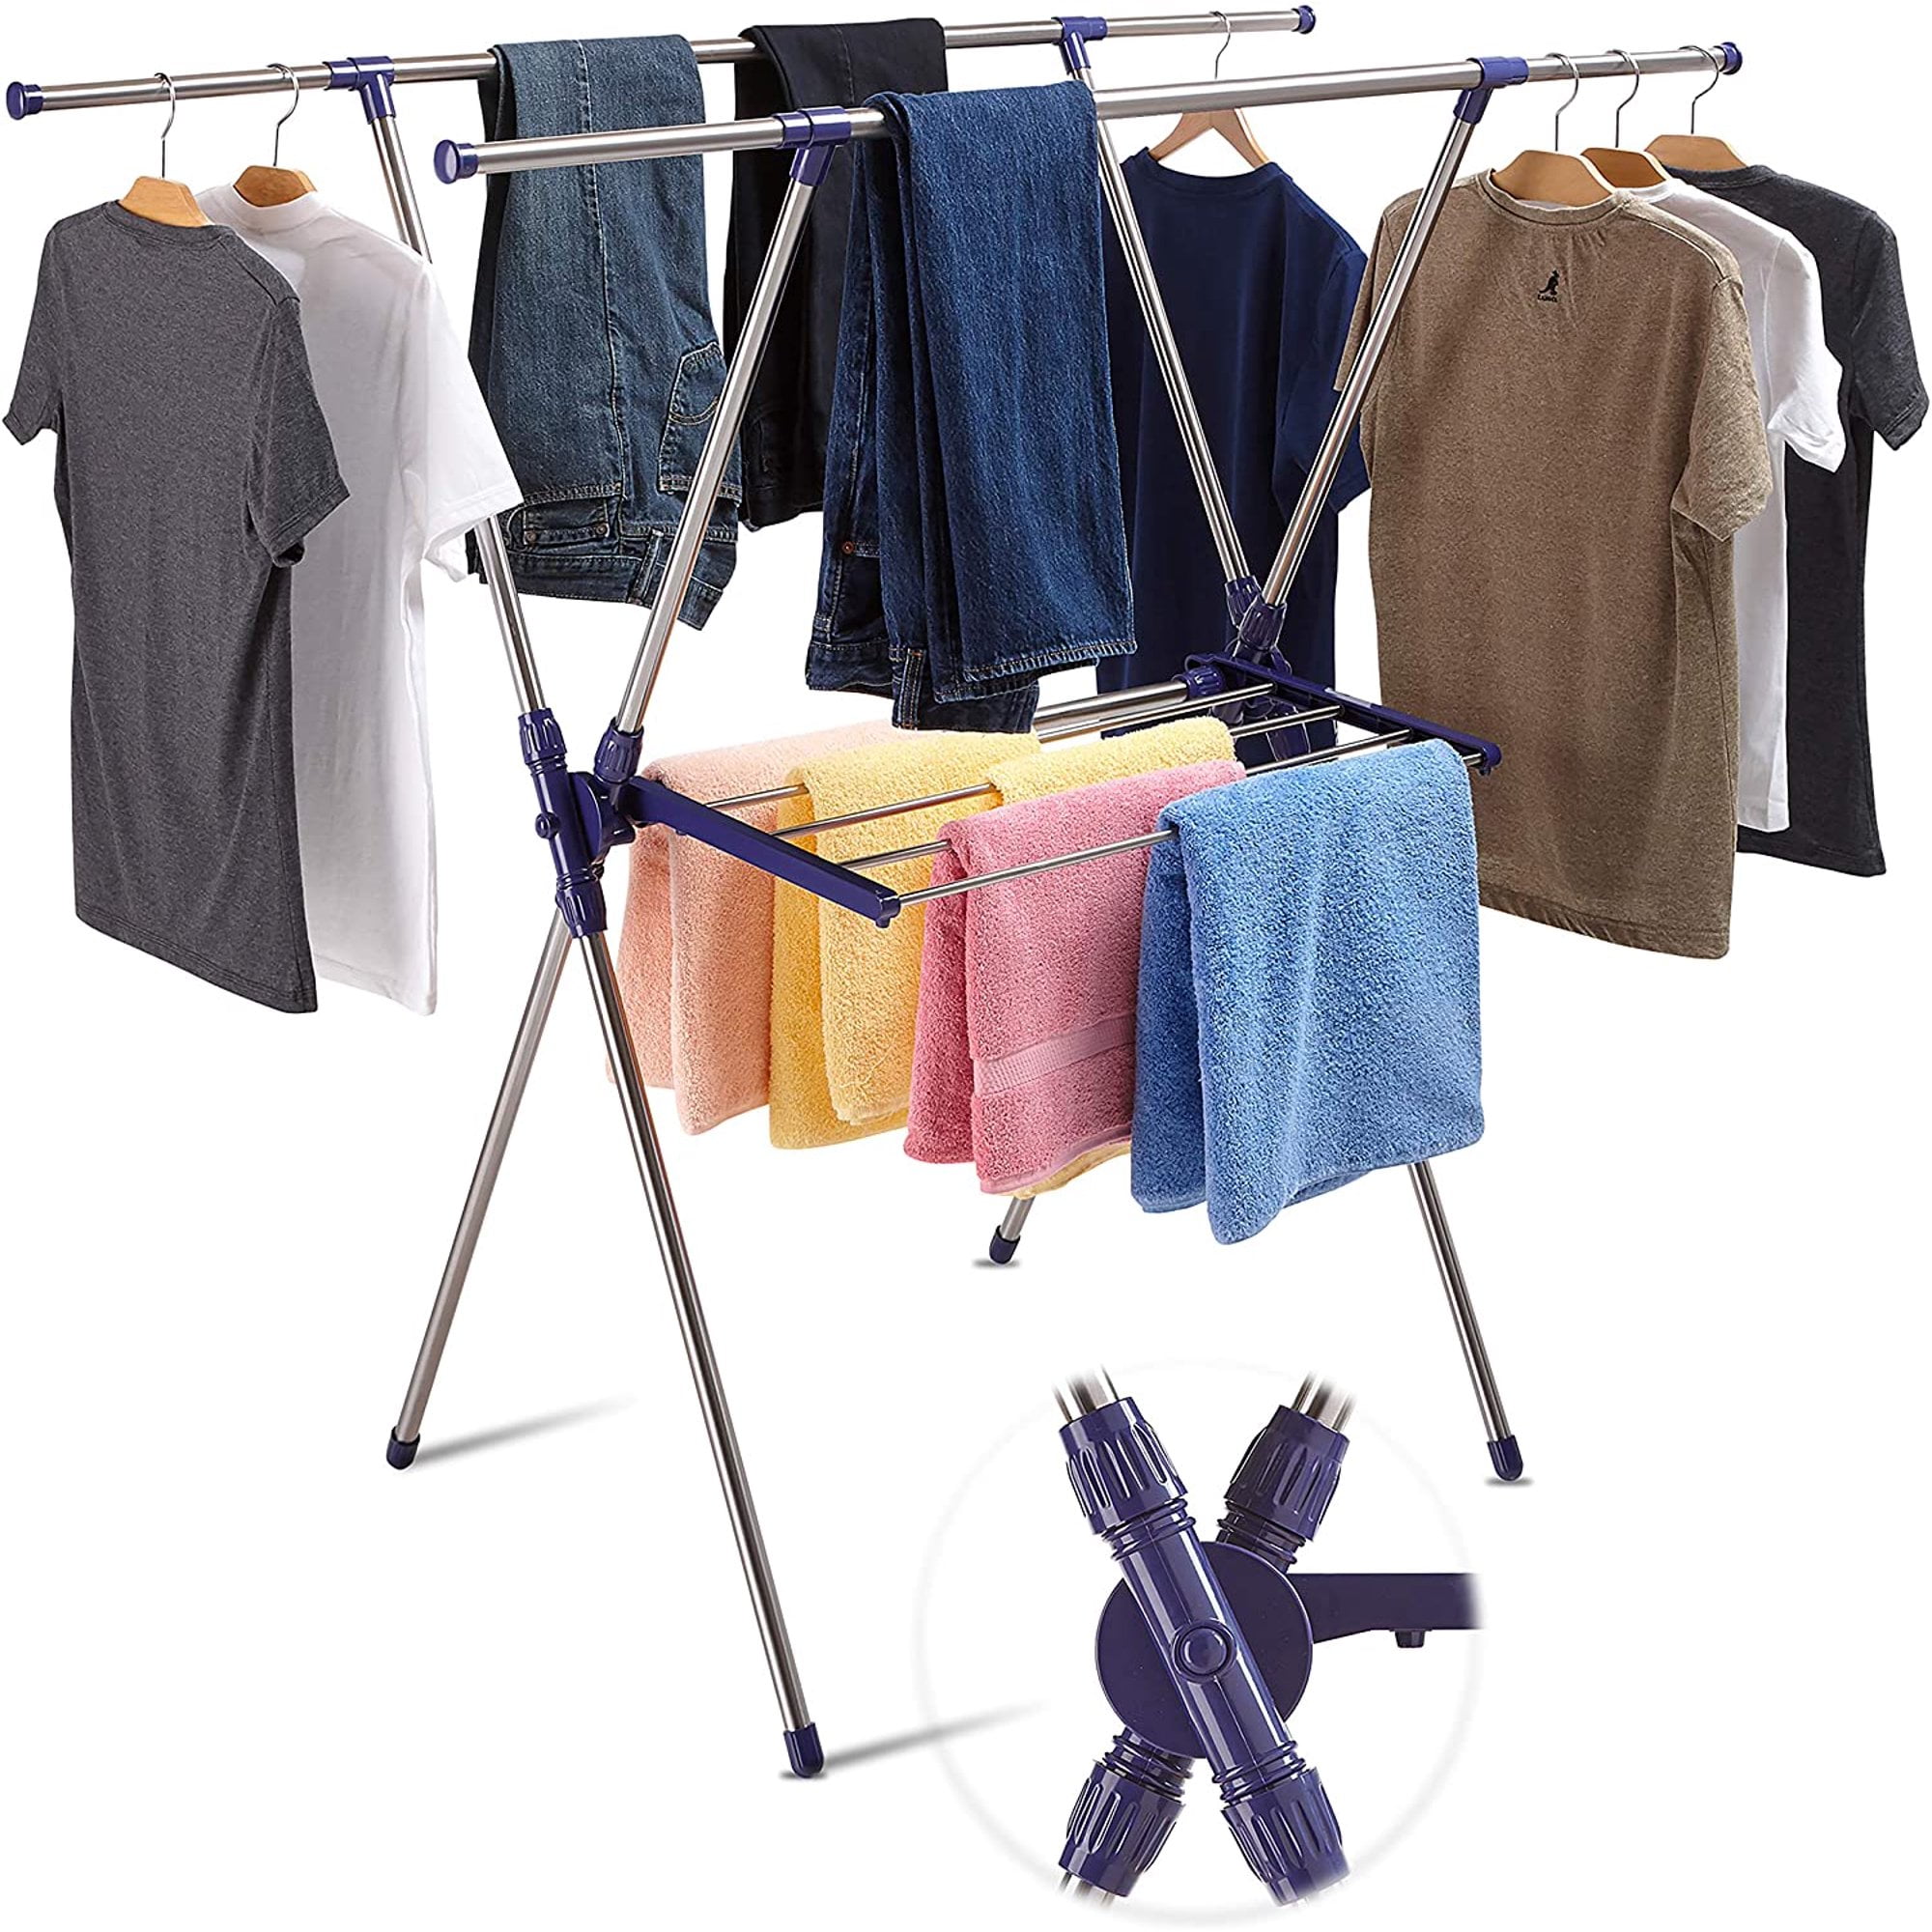 Tripod Drying Rack Outdoor Collapsible Steel Stand Dryer Indoor Clothes Hanger 